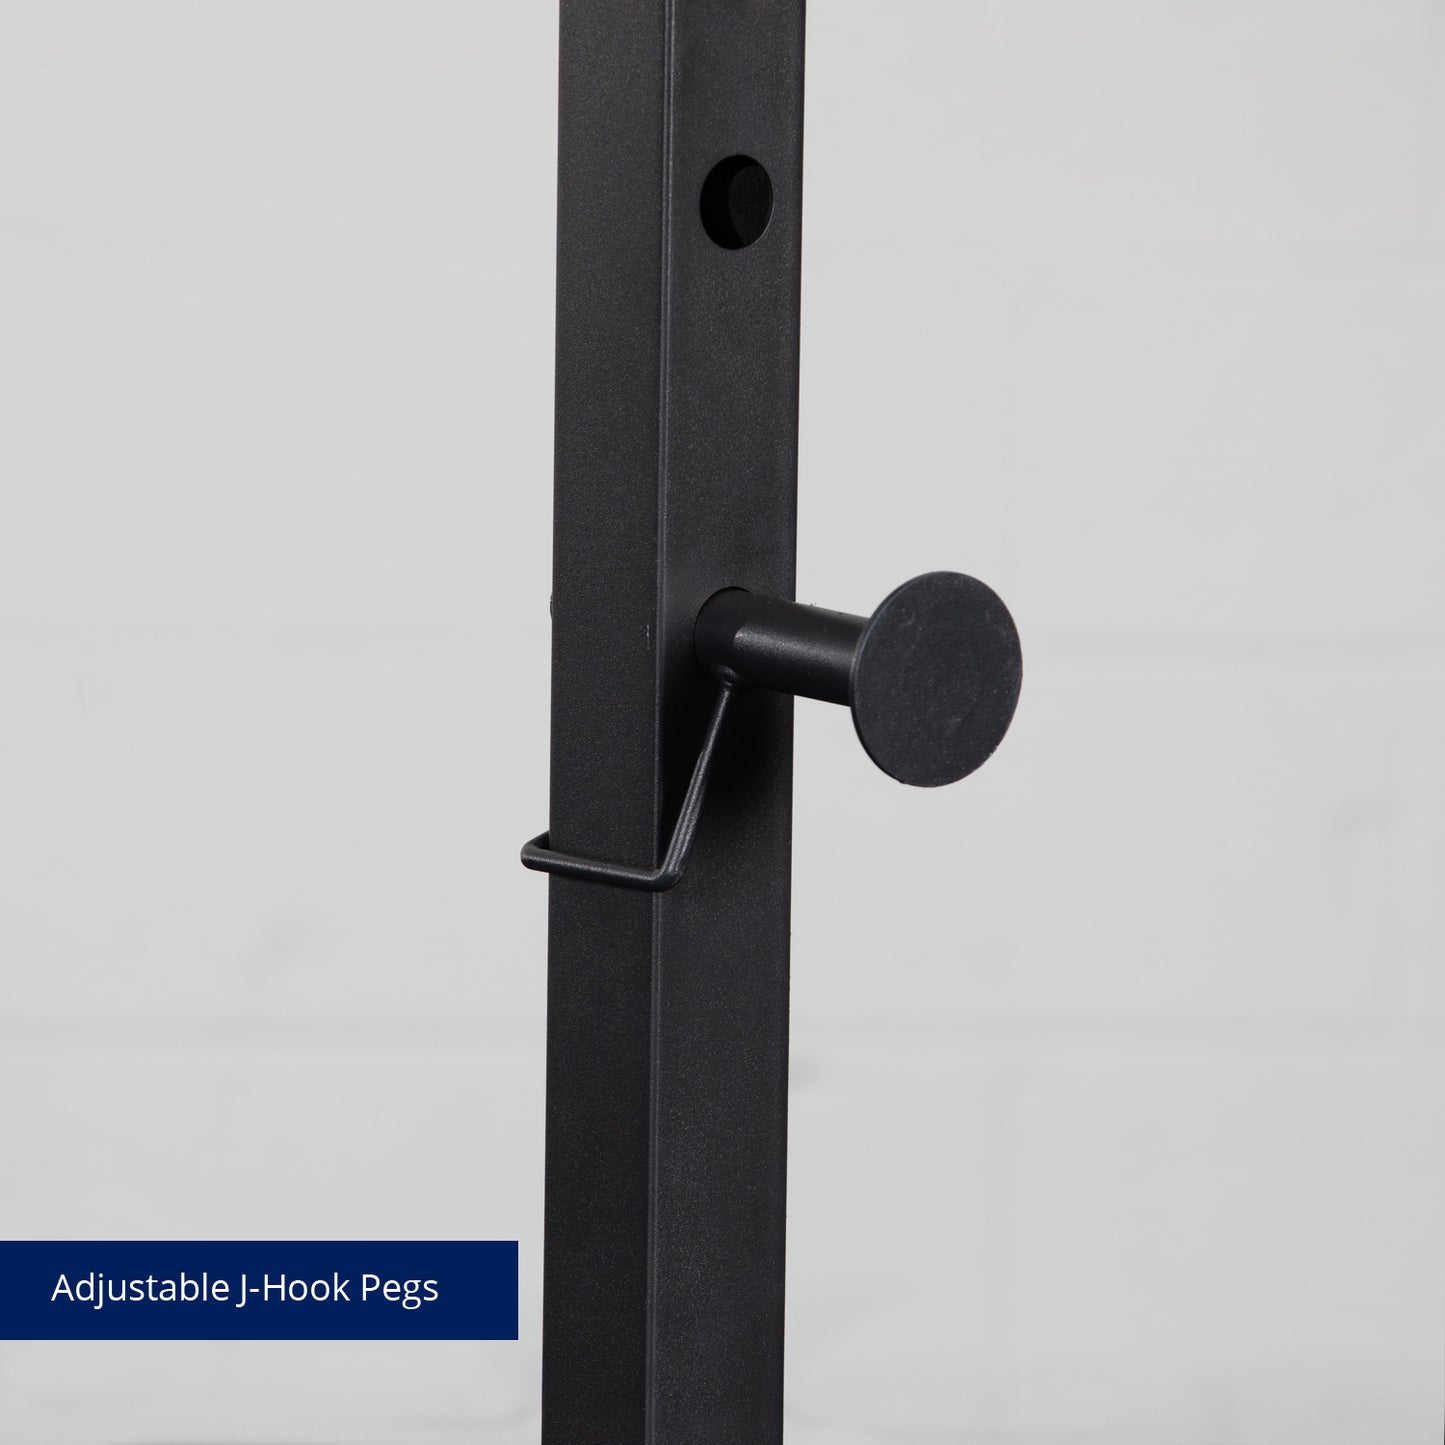 Power Tower With Bench - Adjustable J-Hook Pegs - view 9